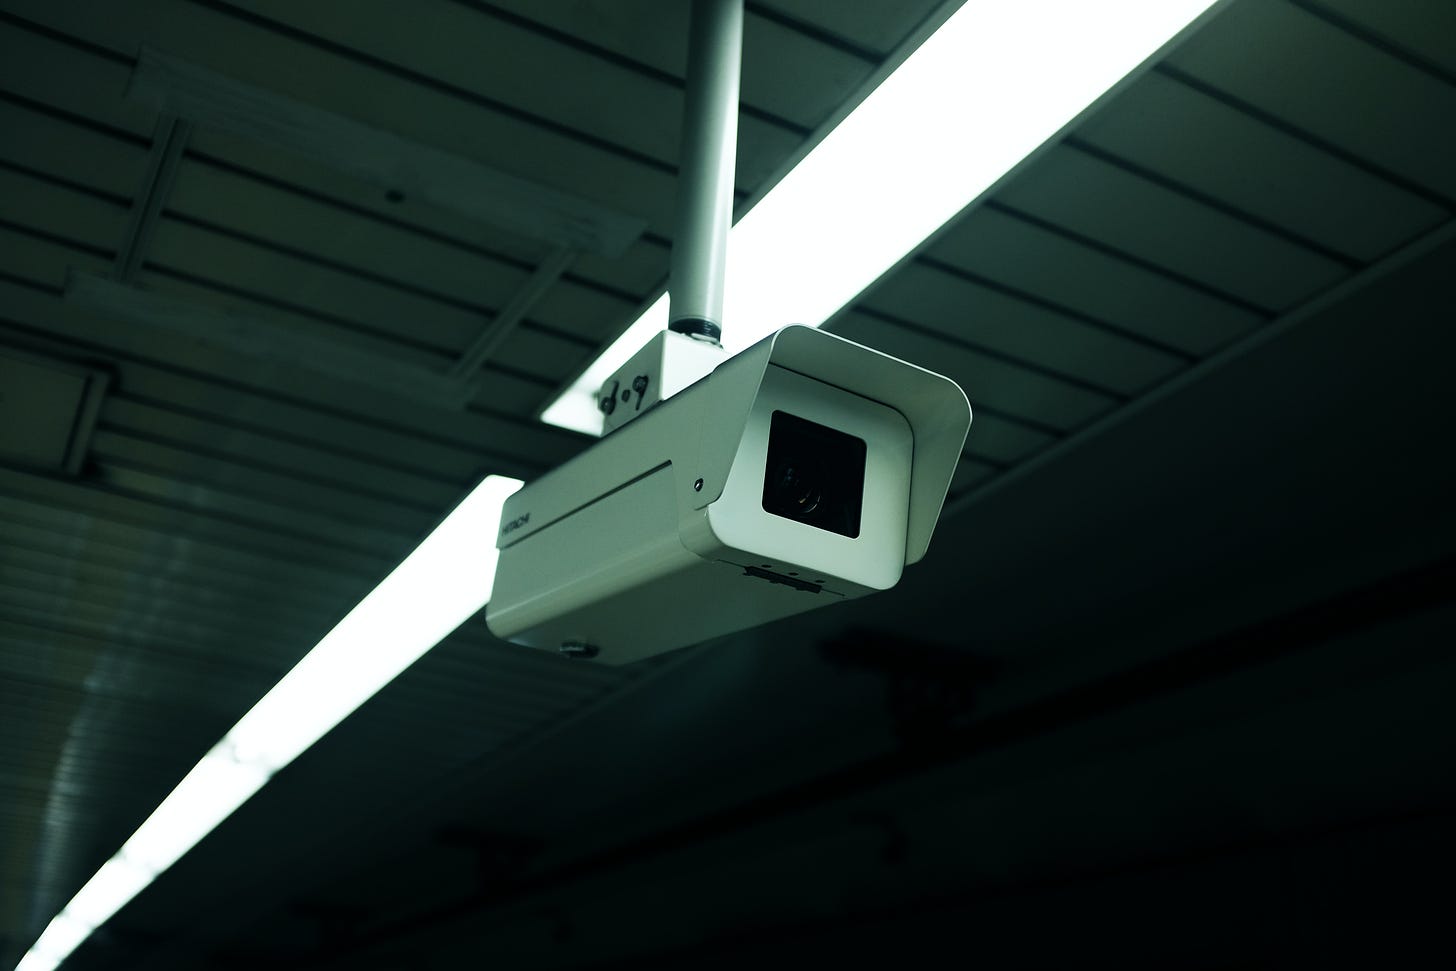 Surveillance camera hanging from ceiling